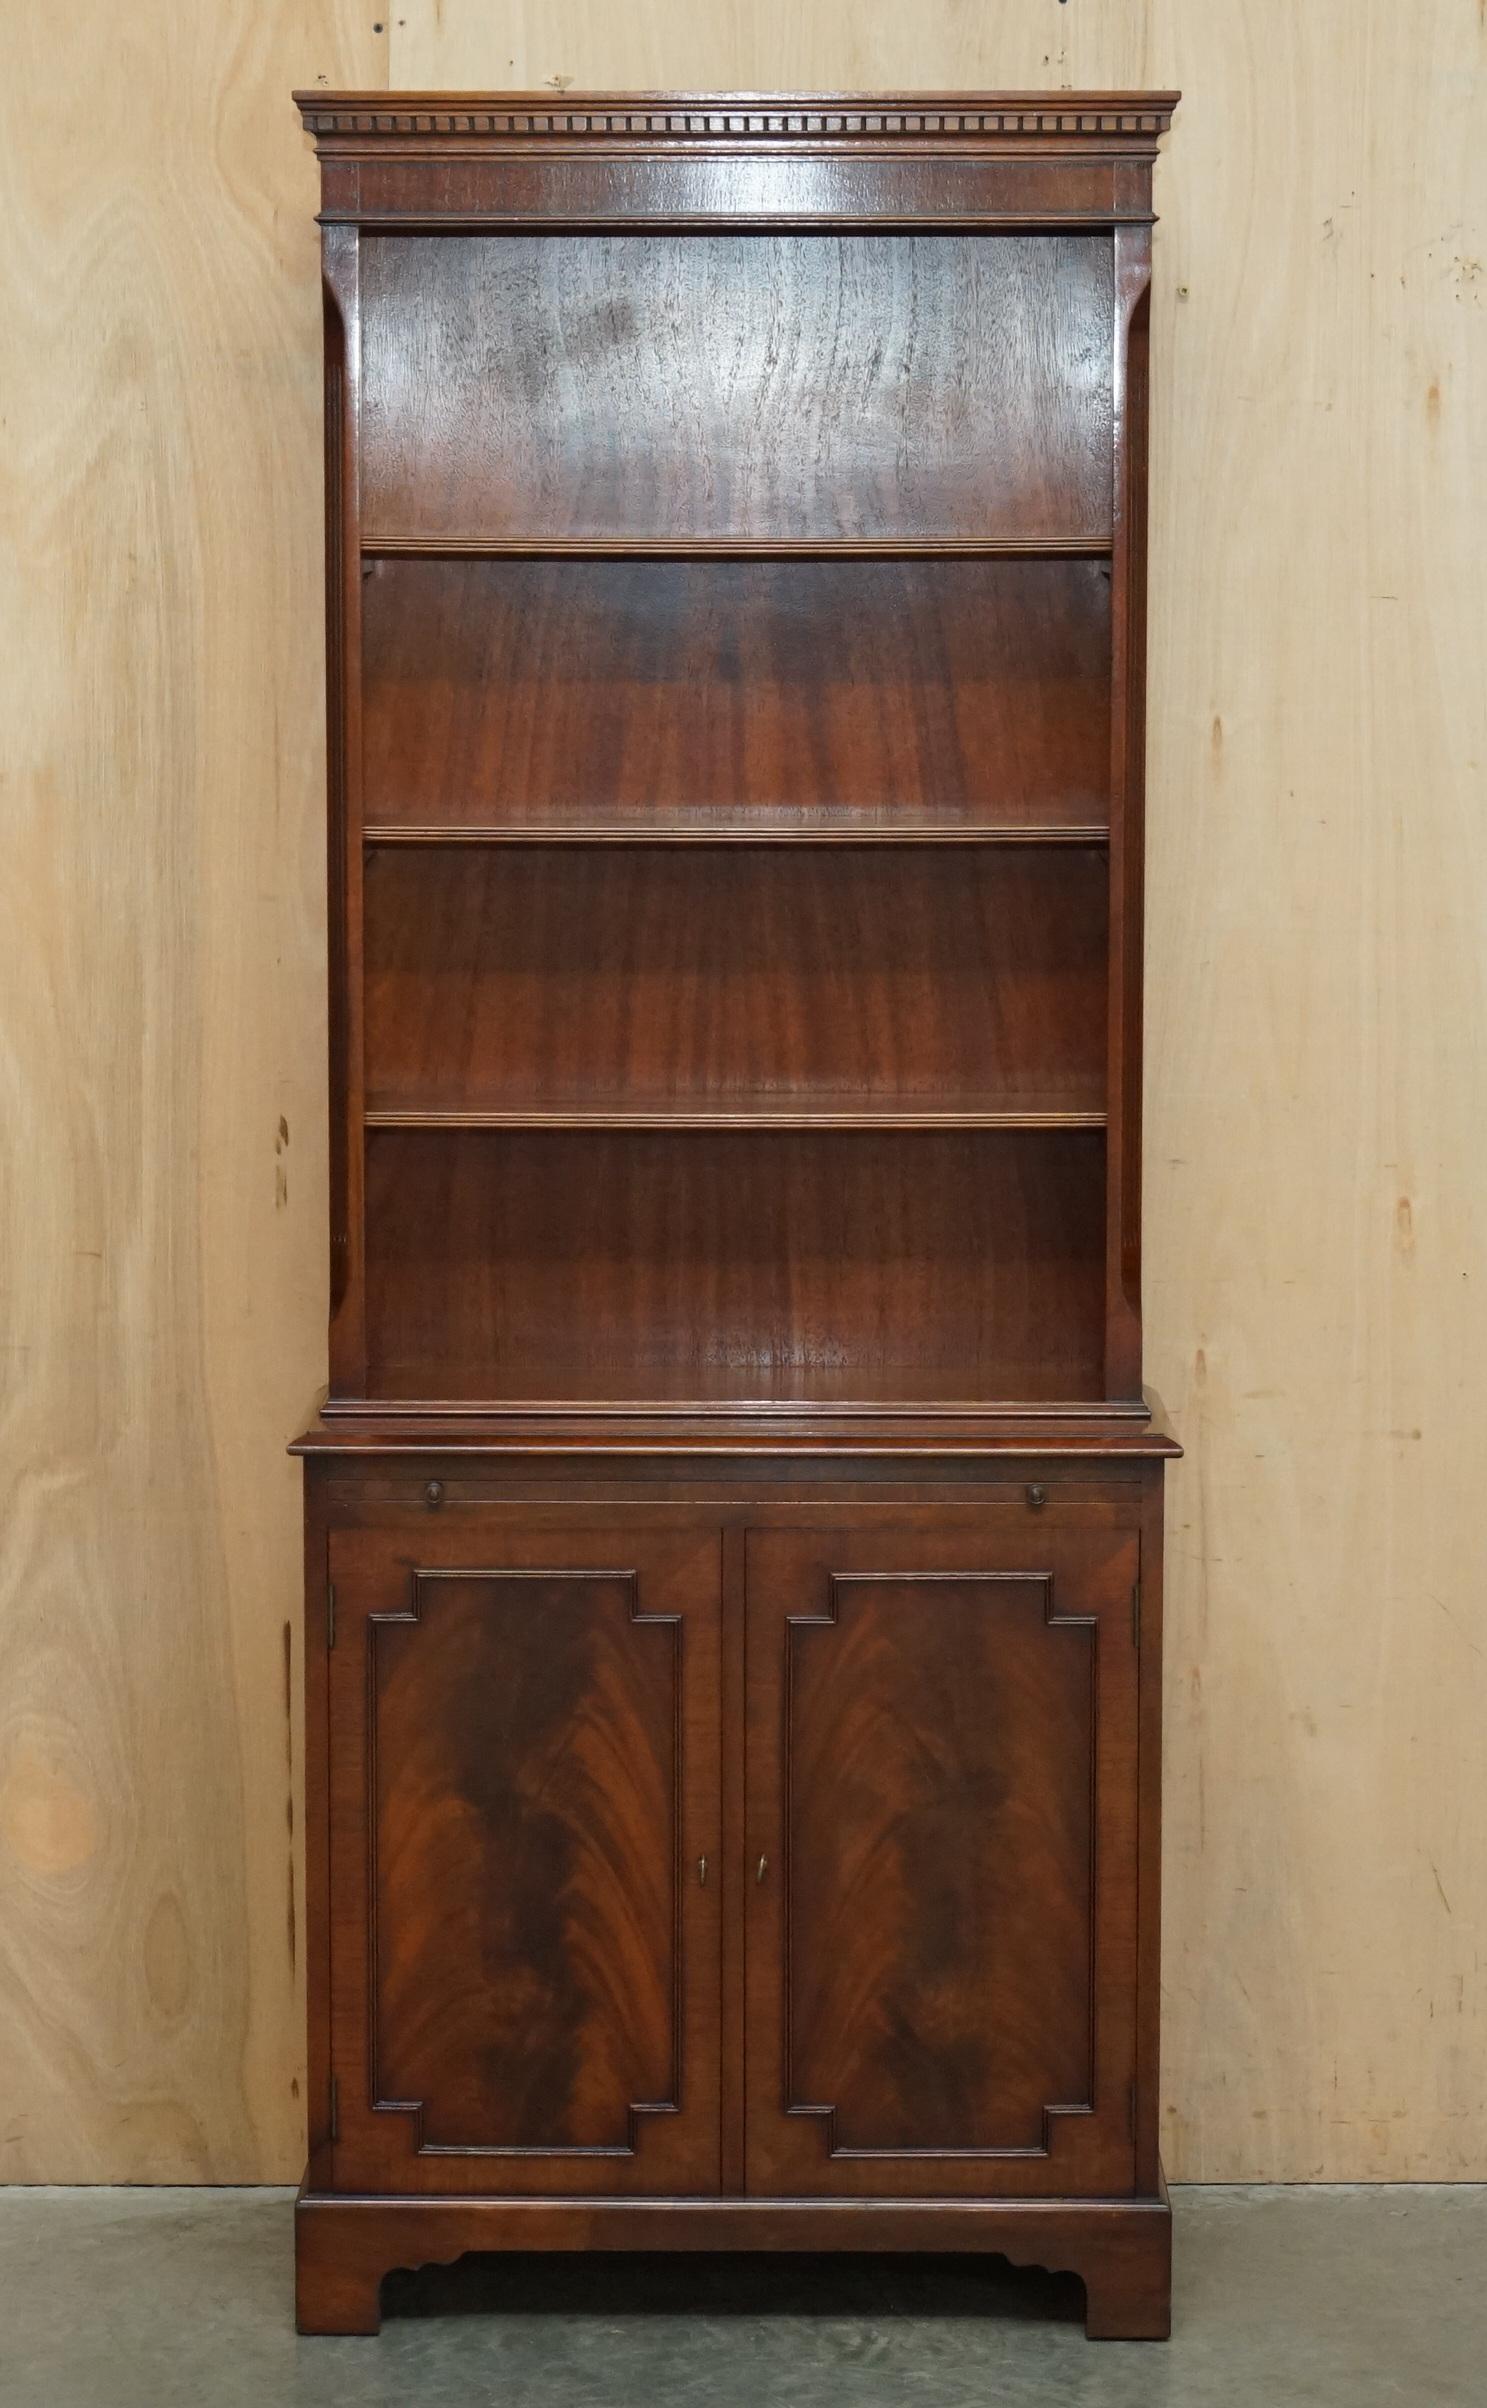 EXQUISITE PAIR OF FLAMED HARDWOOD LIBRARY BOOKCASES SLIP DRiNKS SERVING SHELVES For Sale 9